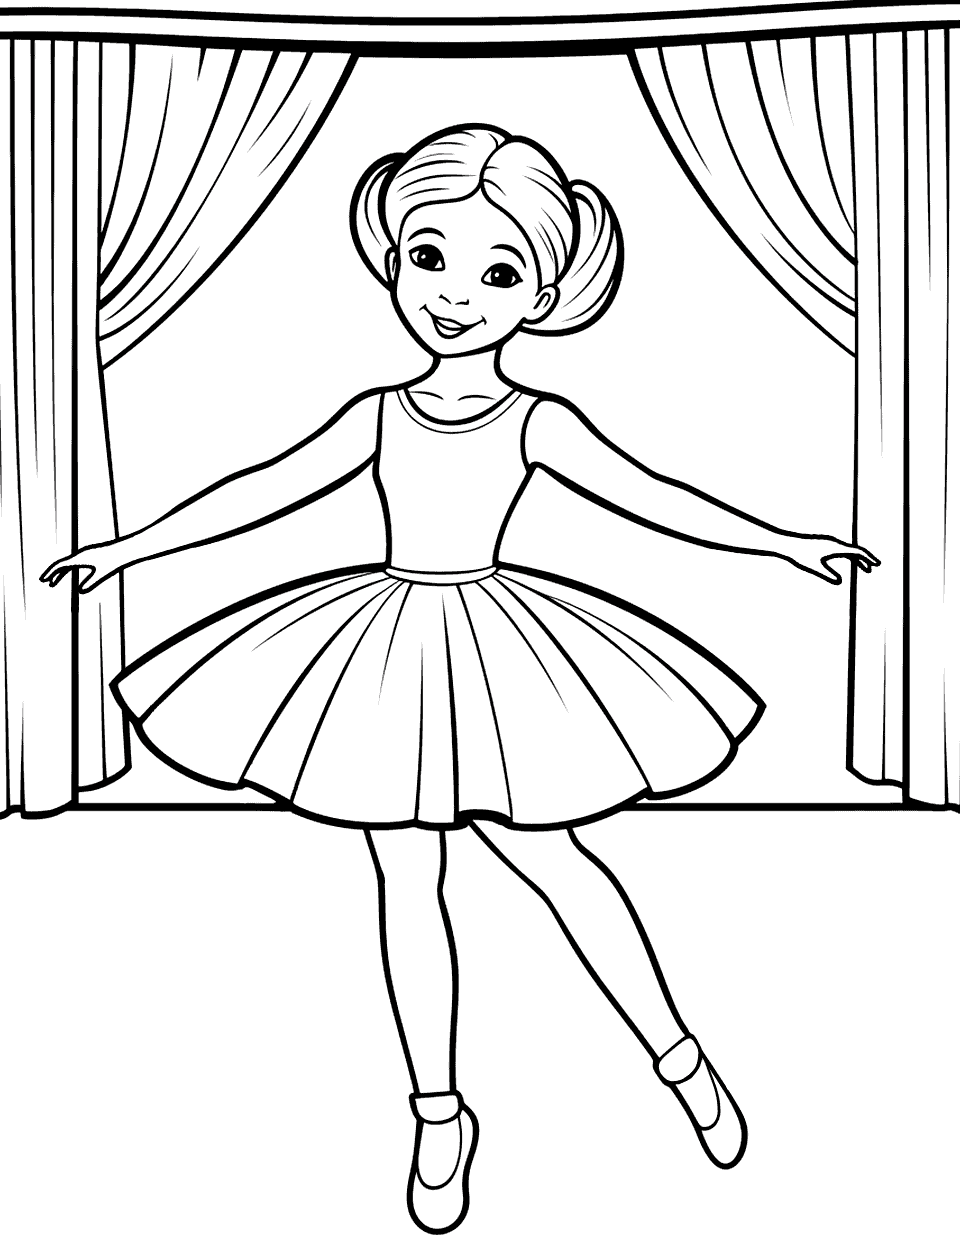 Ballet Dancer at School Show Ballerina Coloring Page - A young ballet dancer performing at a school show.